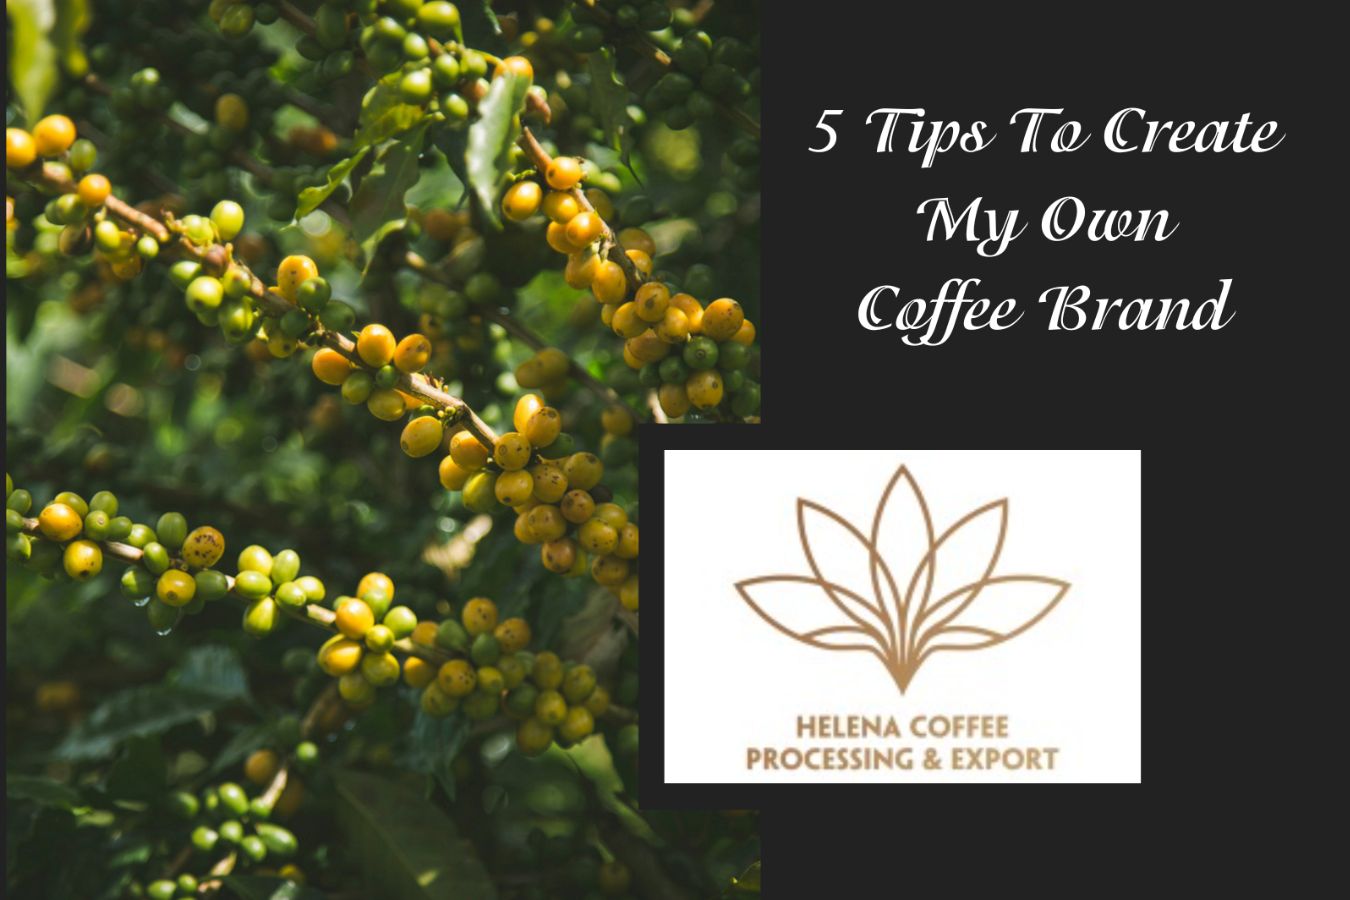 5 Tips To Create My Own Coffee Brand